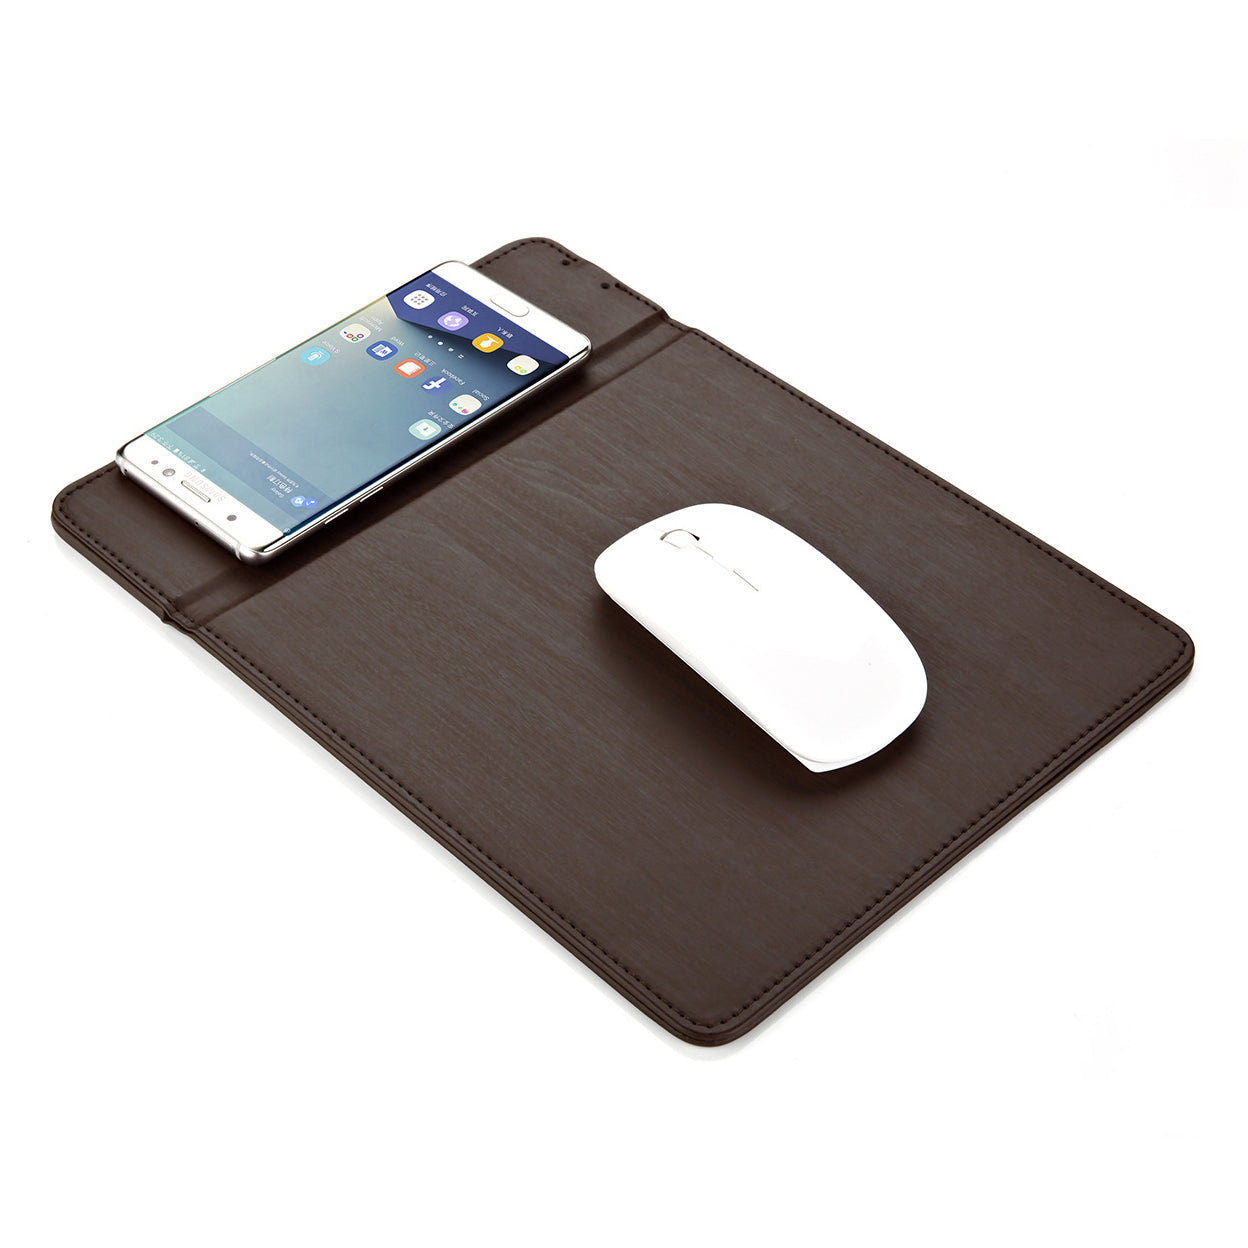 Power Pad Wireless Charger And Mouse Pad For iPhone 8 And Samsung by VistaShops